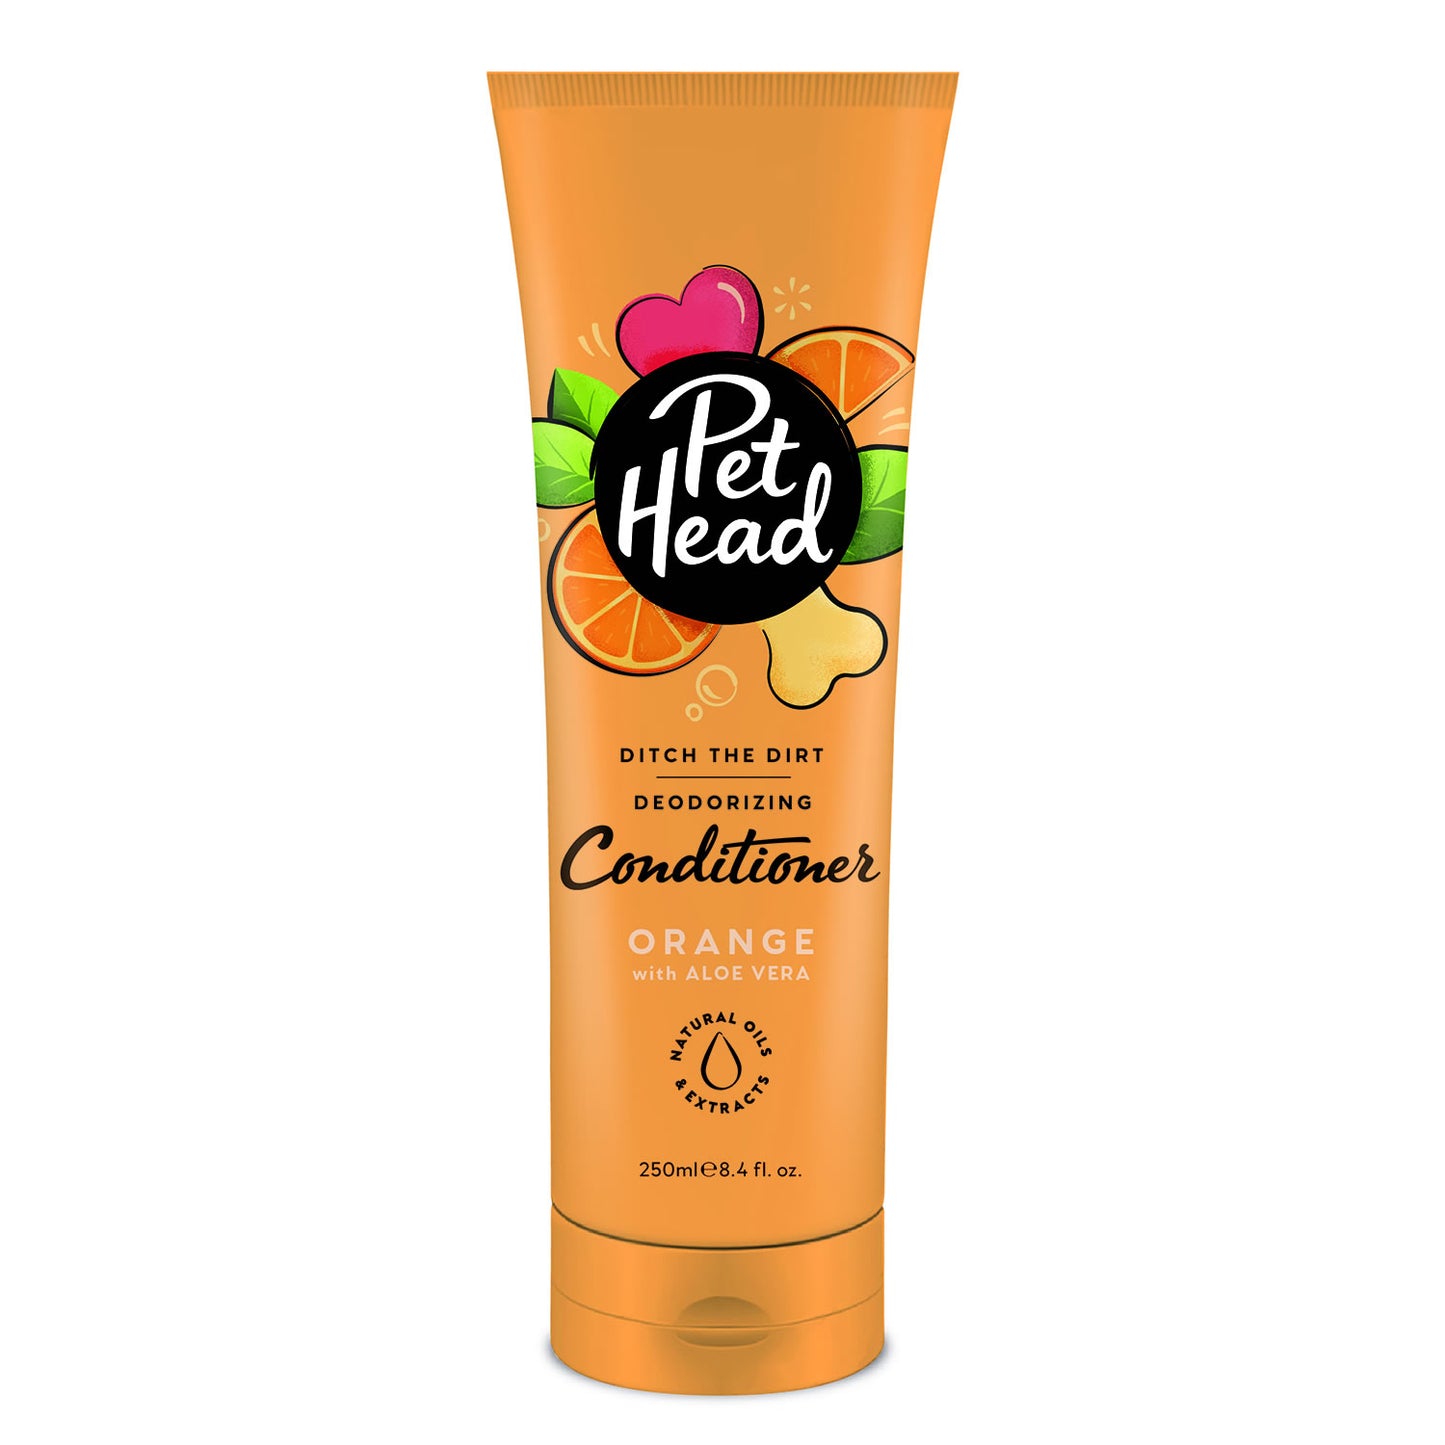 Pet Head Ditch the Dirt Conditioner - 250 Ml